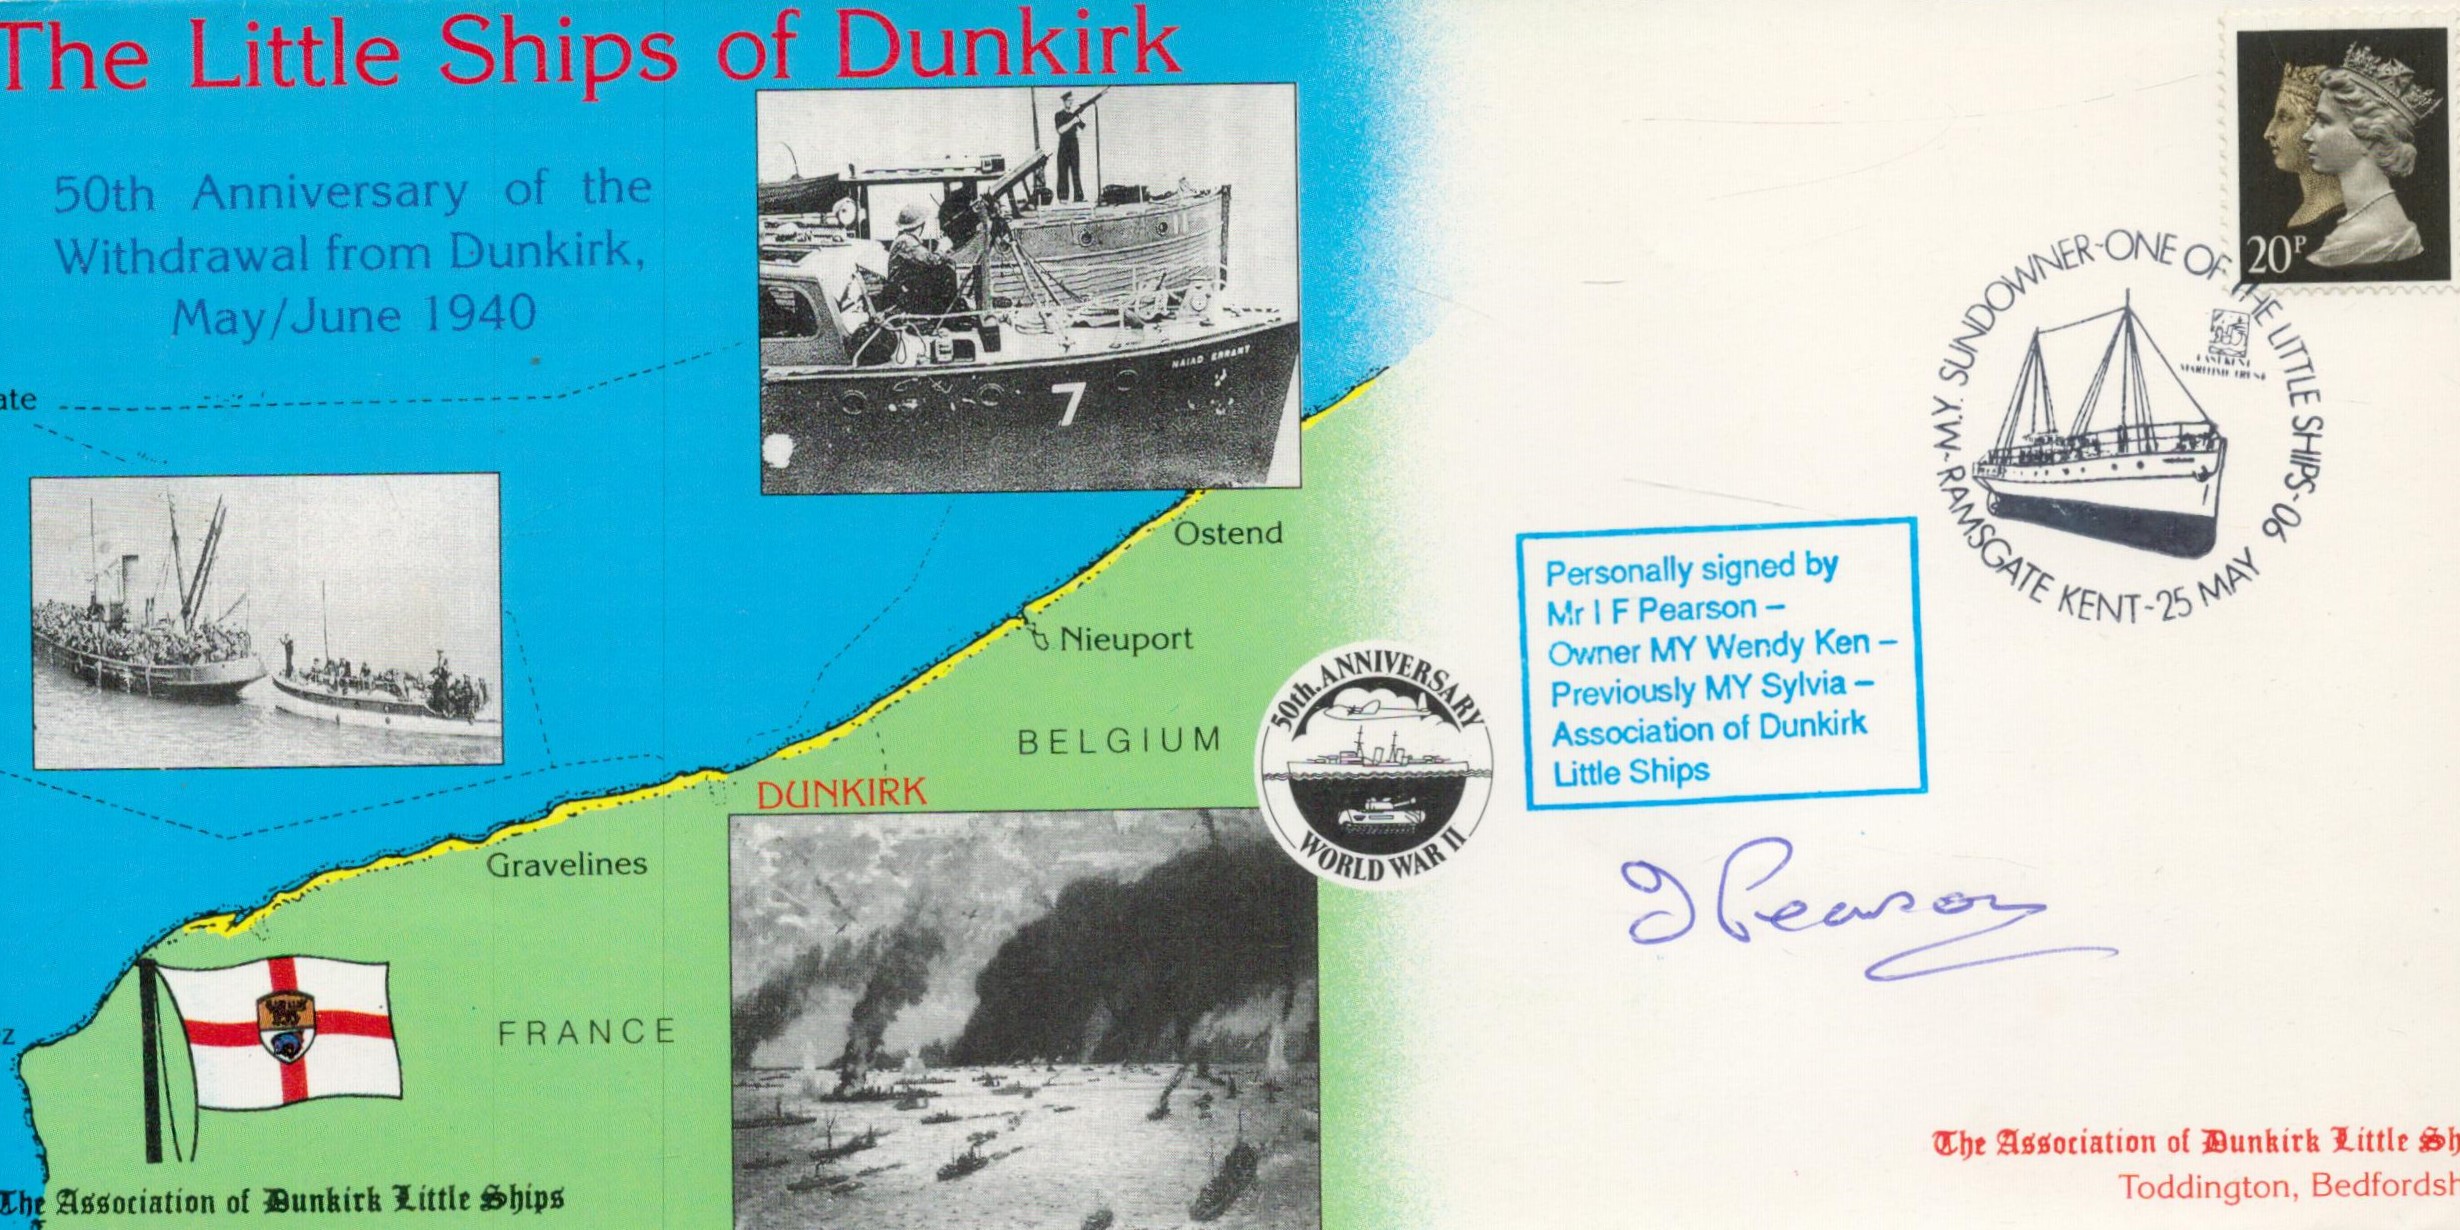 WWII Mr I F Pearson owner My Wendy Ken previously My Sylvia Association of Dunkirk Little Ships